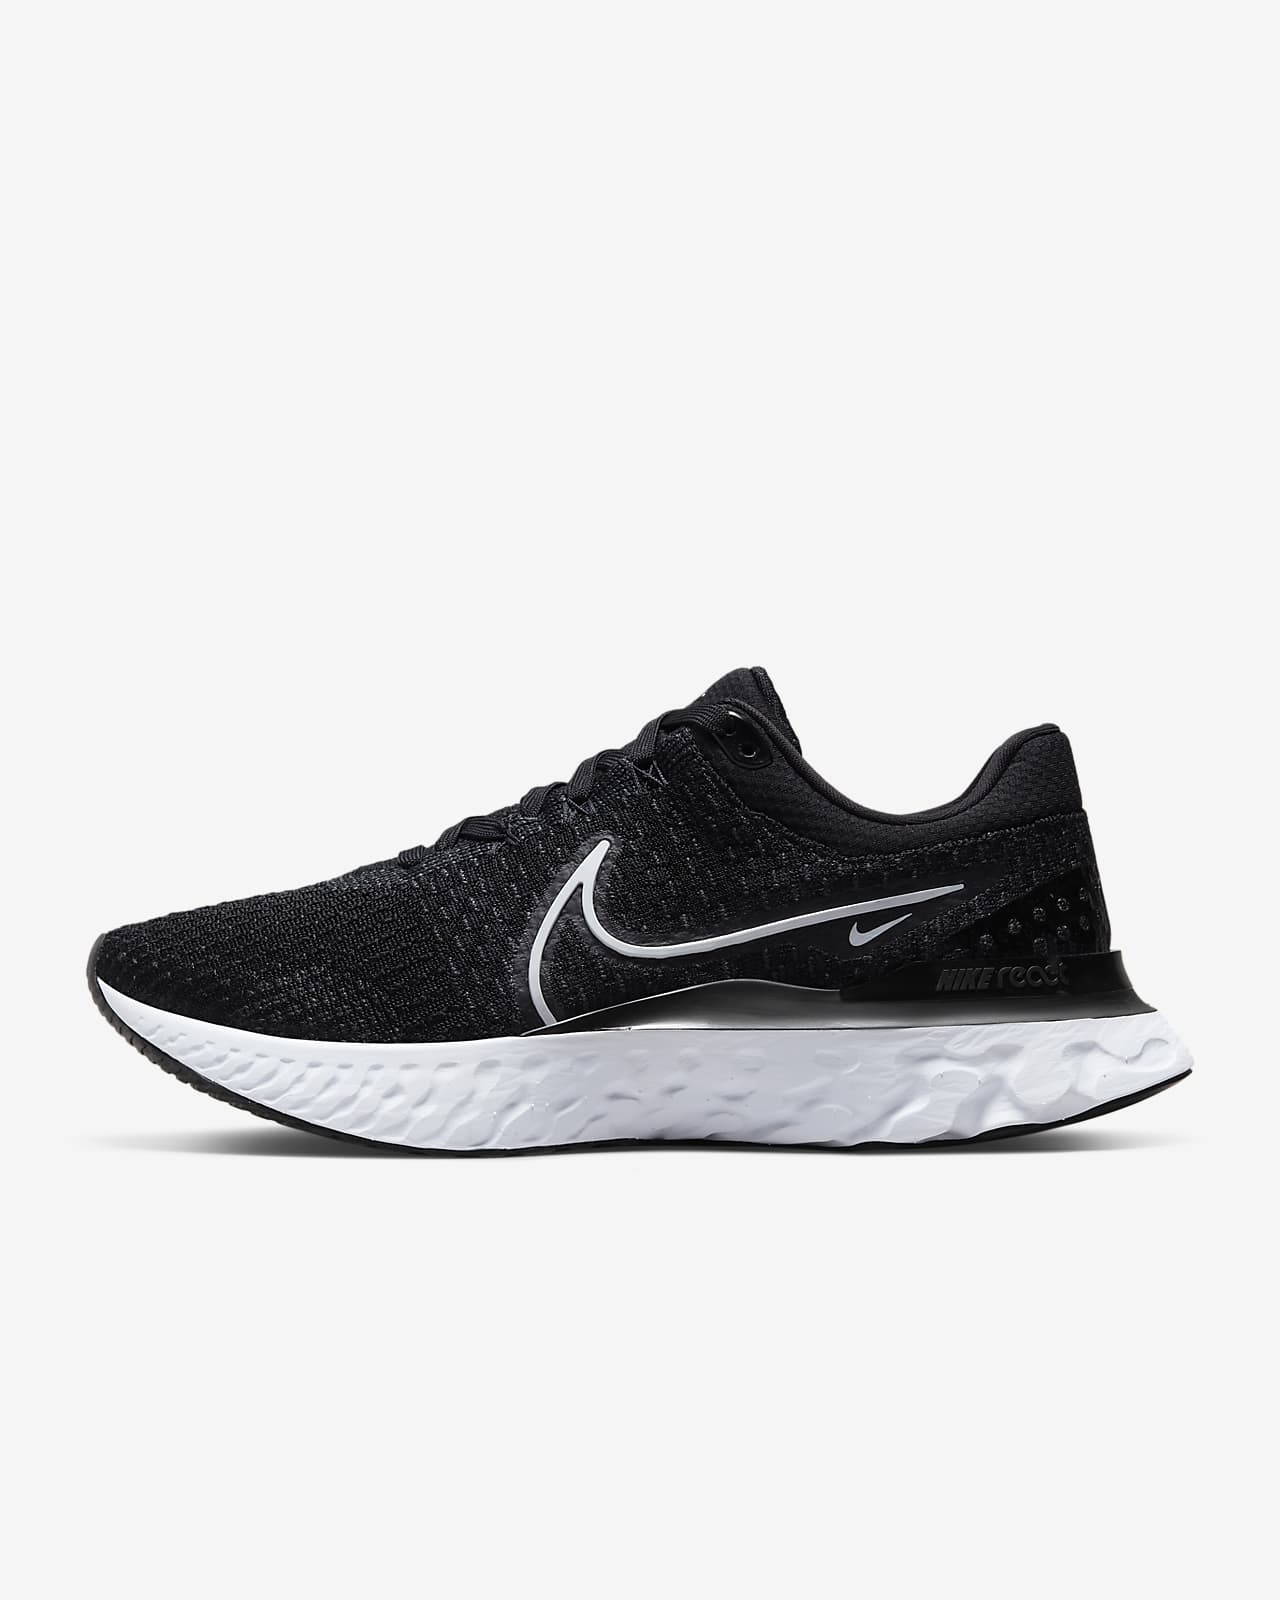 ocupado Credencial Chaise longue Nike React Infinity 3 Men's Road Running Shoes. Nike AE